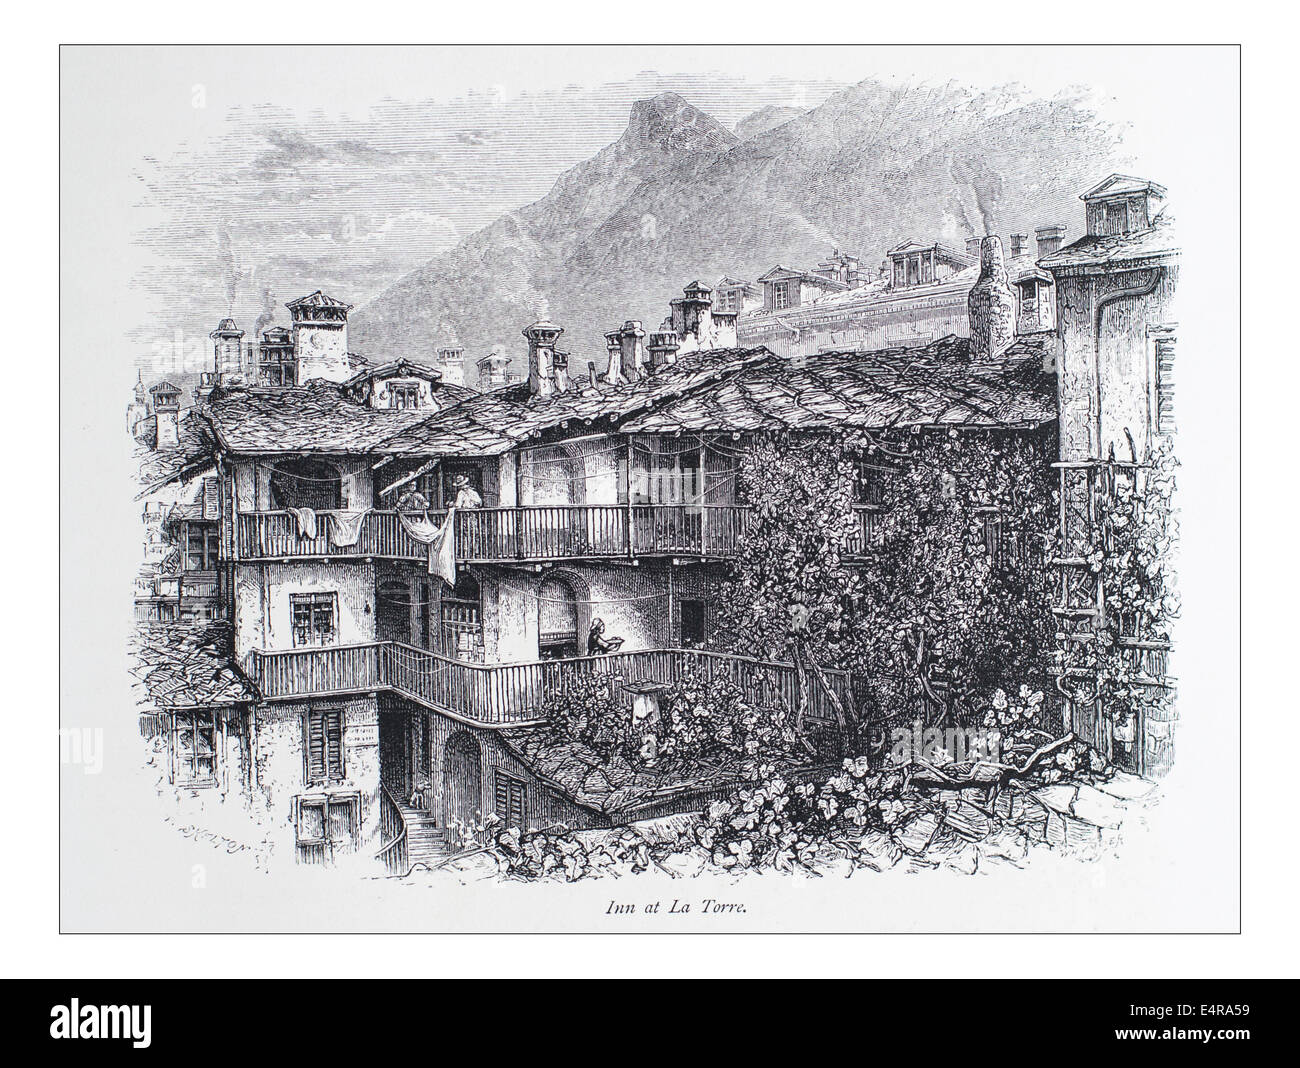 Inn at La Torre, France Illustration from 'The British isles - Cassell Petter & Galpin Part 8 Picturesque Europe. Picturesque Europe was an illustrated set of Magazines published by Cassell, Petter, Galpin & Co. of London, Paris and New York in 1877. The publications depicted tourist haunts in Europe, with text descriptions and steel and wood engravings by eminent artists of the time, such as Harry Fenn, William H J Boot, Thomas C. L. Rowbotham, Henry T. Green , Myles B. Foster, John Mogford , David H. McKewan, William L. Leitch, Edmund M. Wimperis and Joseph B. Smith. Stock Photo